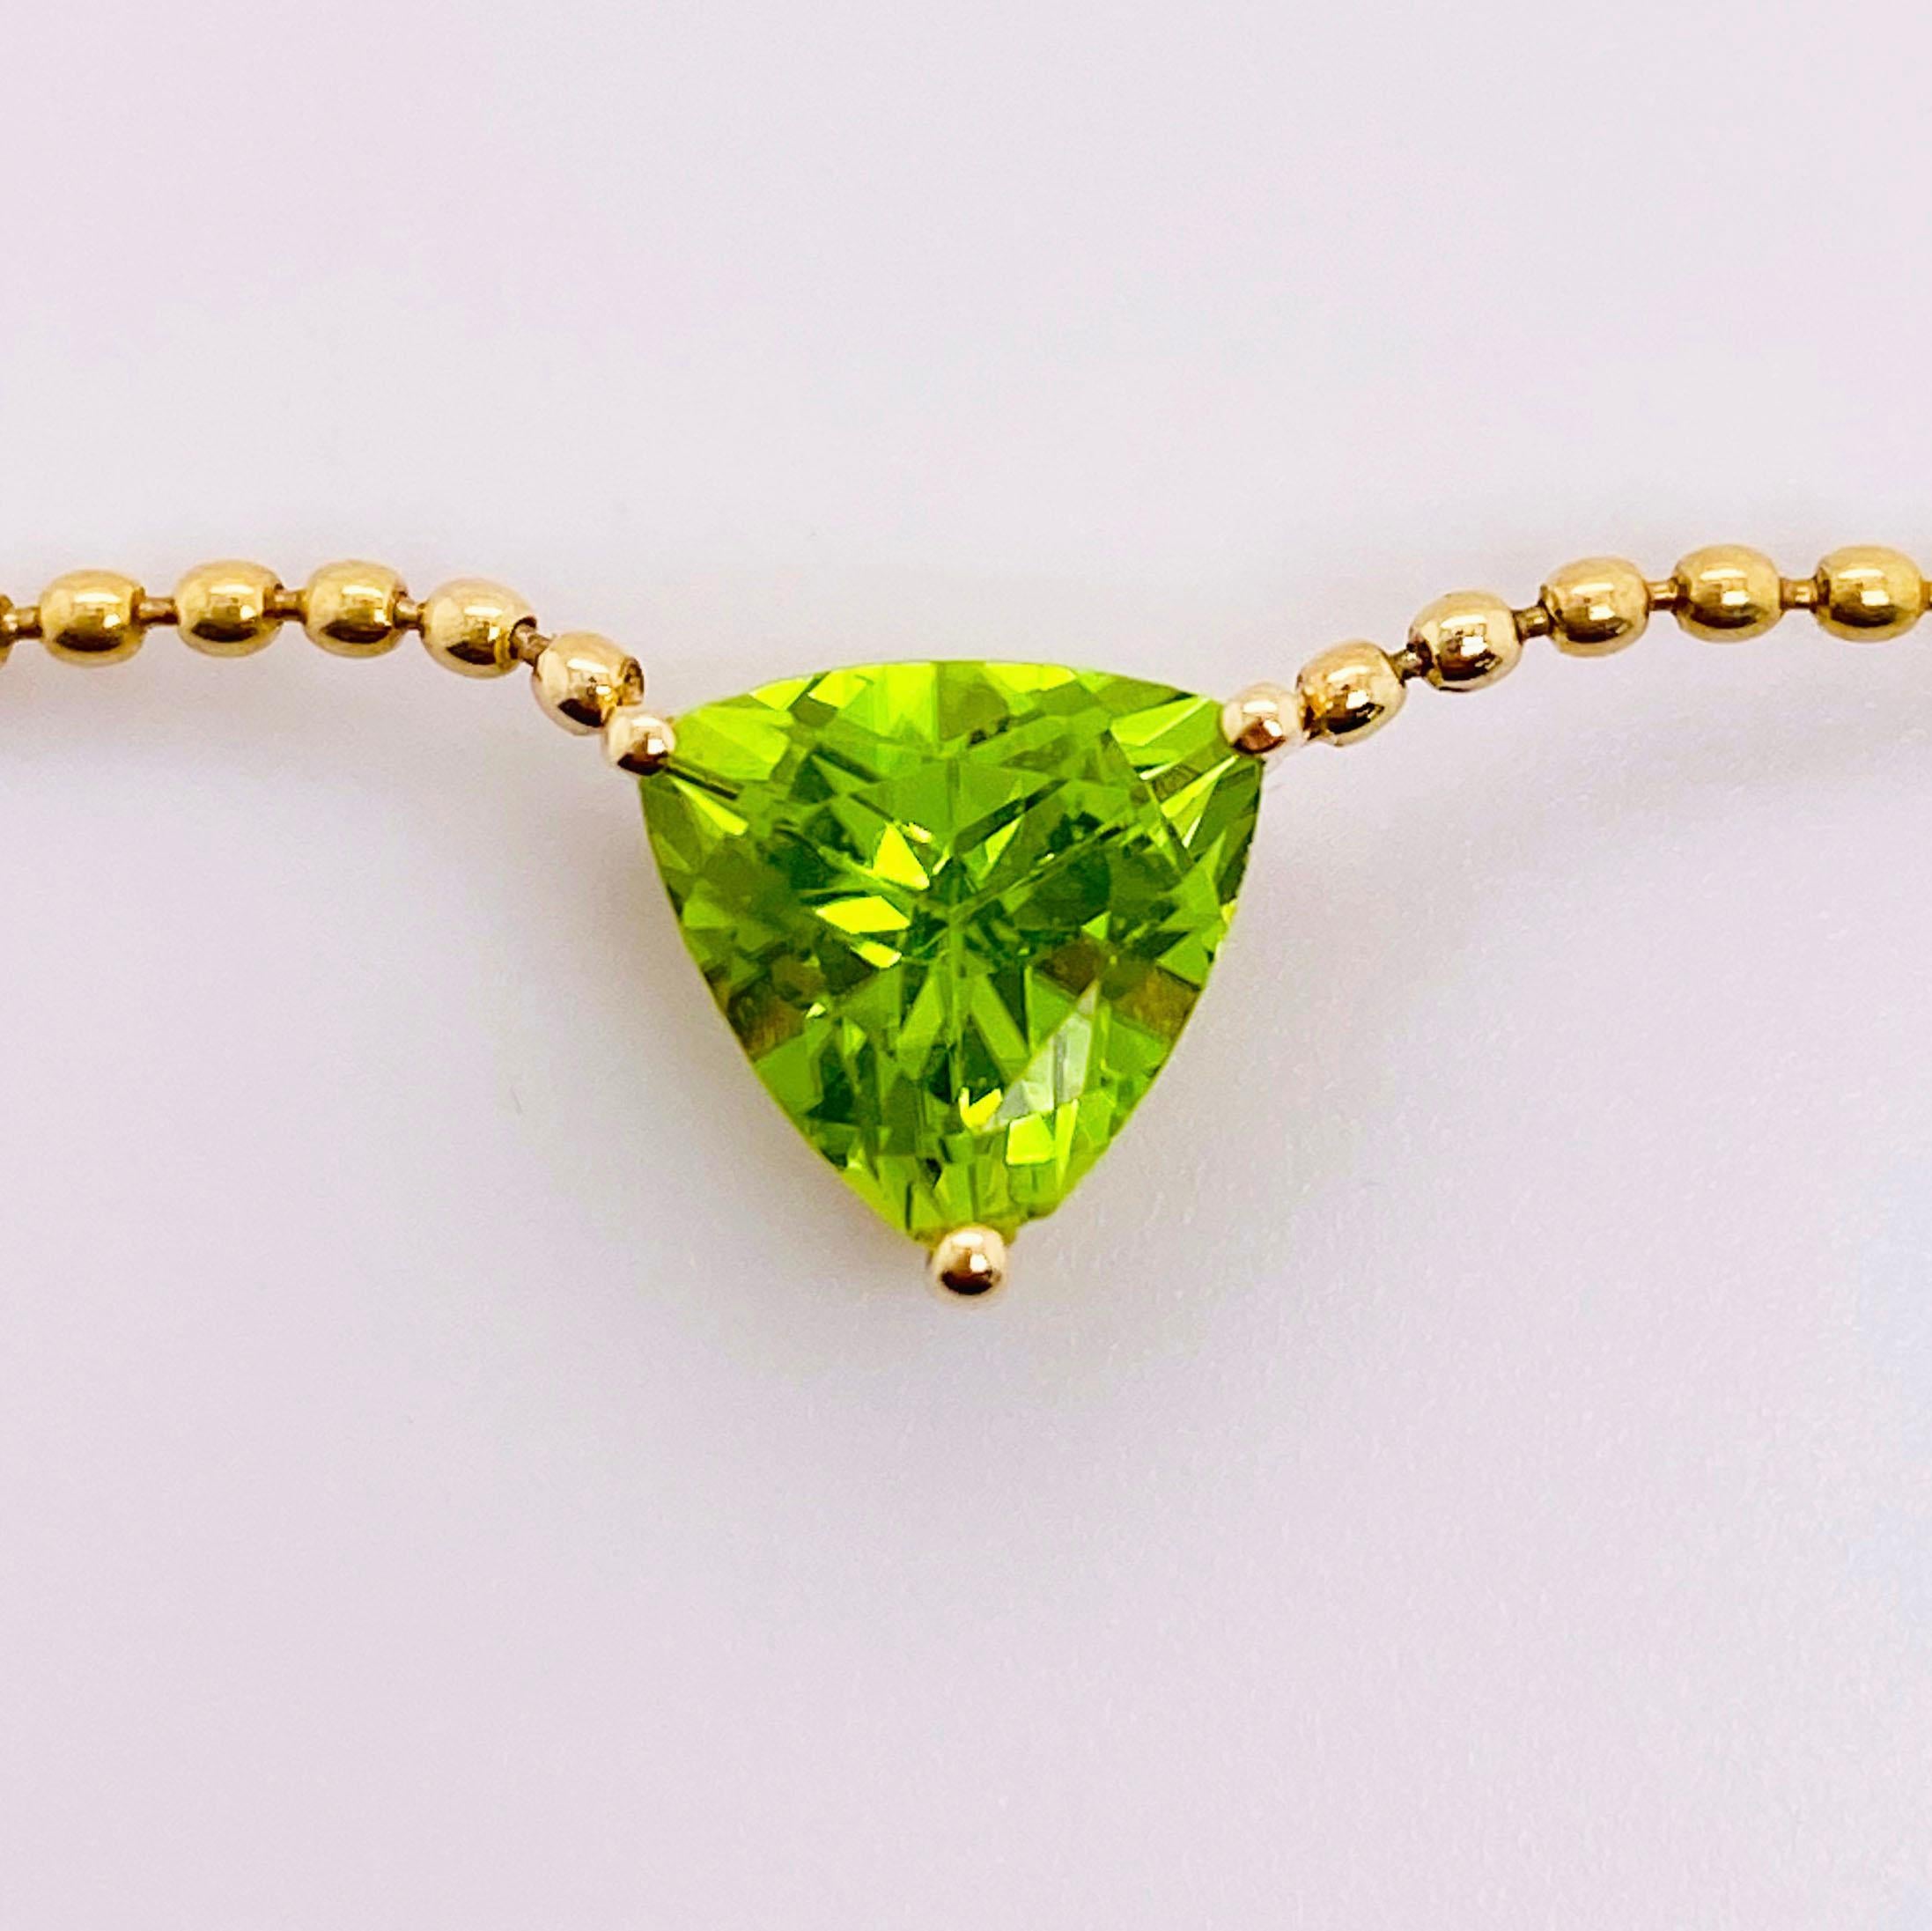 Trillion Peridot 1.25cts Stationary Pendant Necklace 14K Yellow Gold In New Condition For Sale In Austin, TX